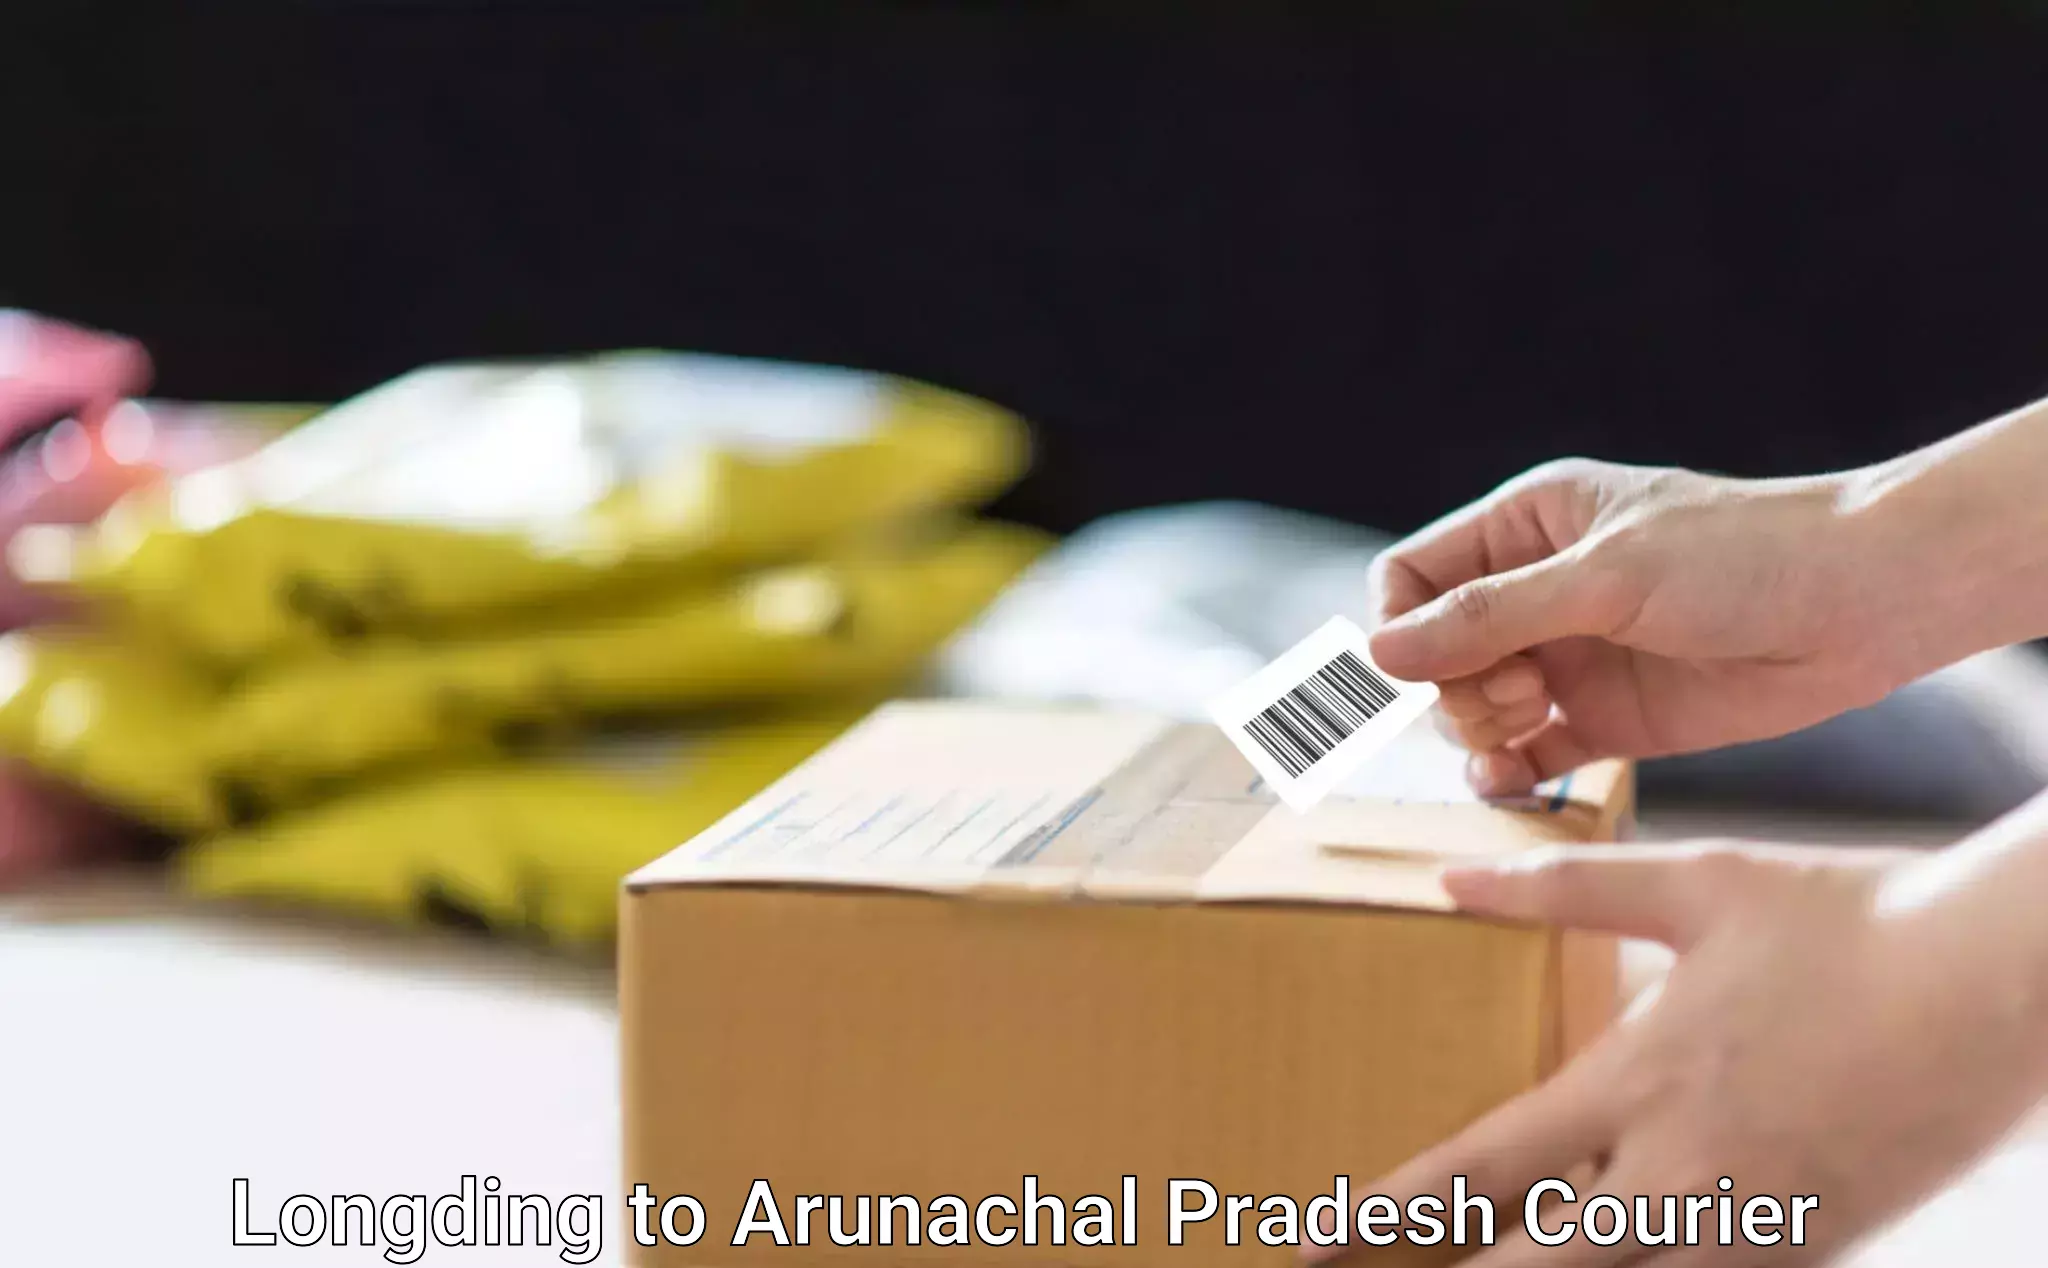 State-of-the-art courier technology Longding to Dirang